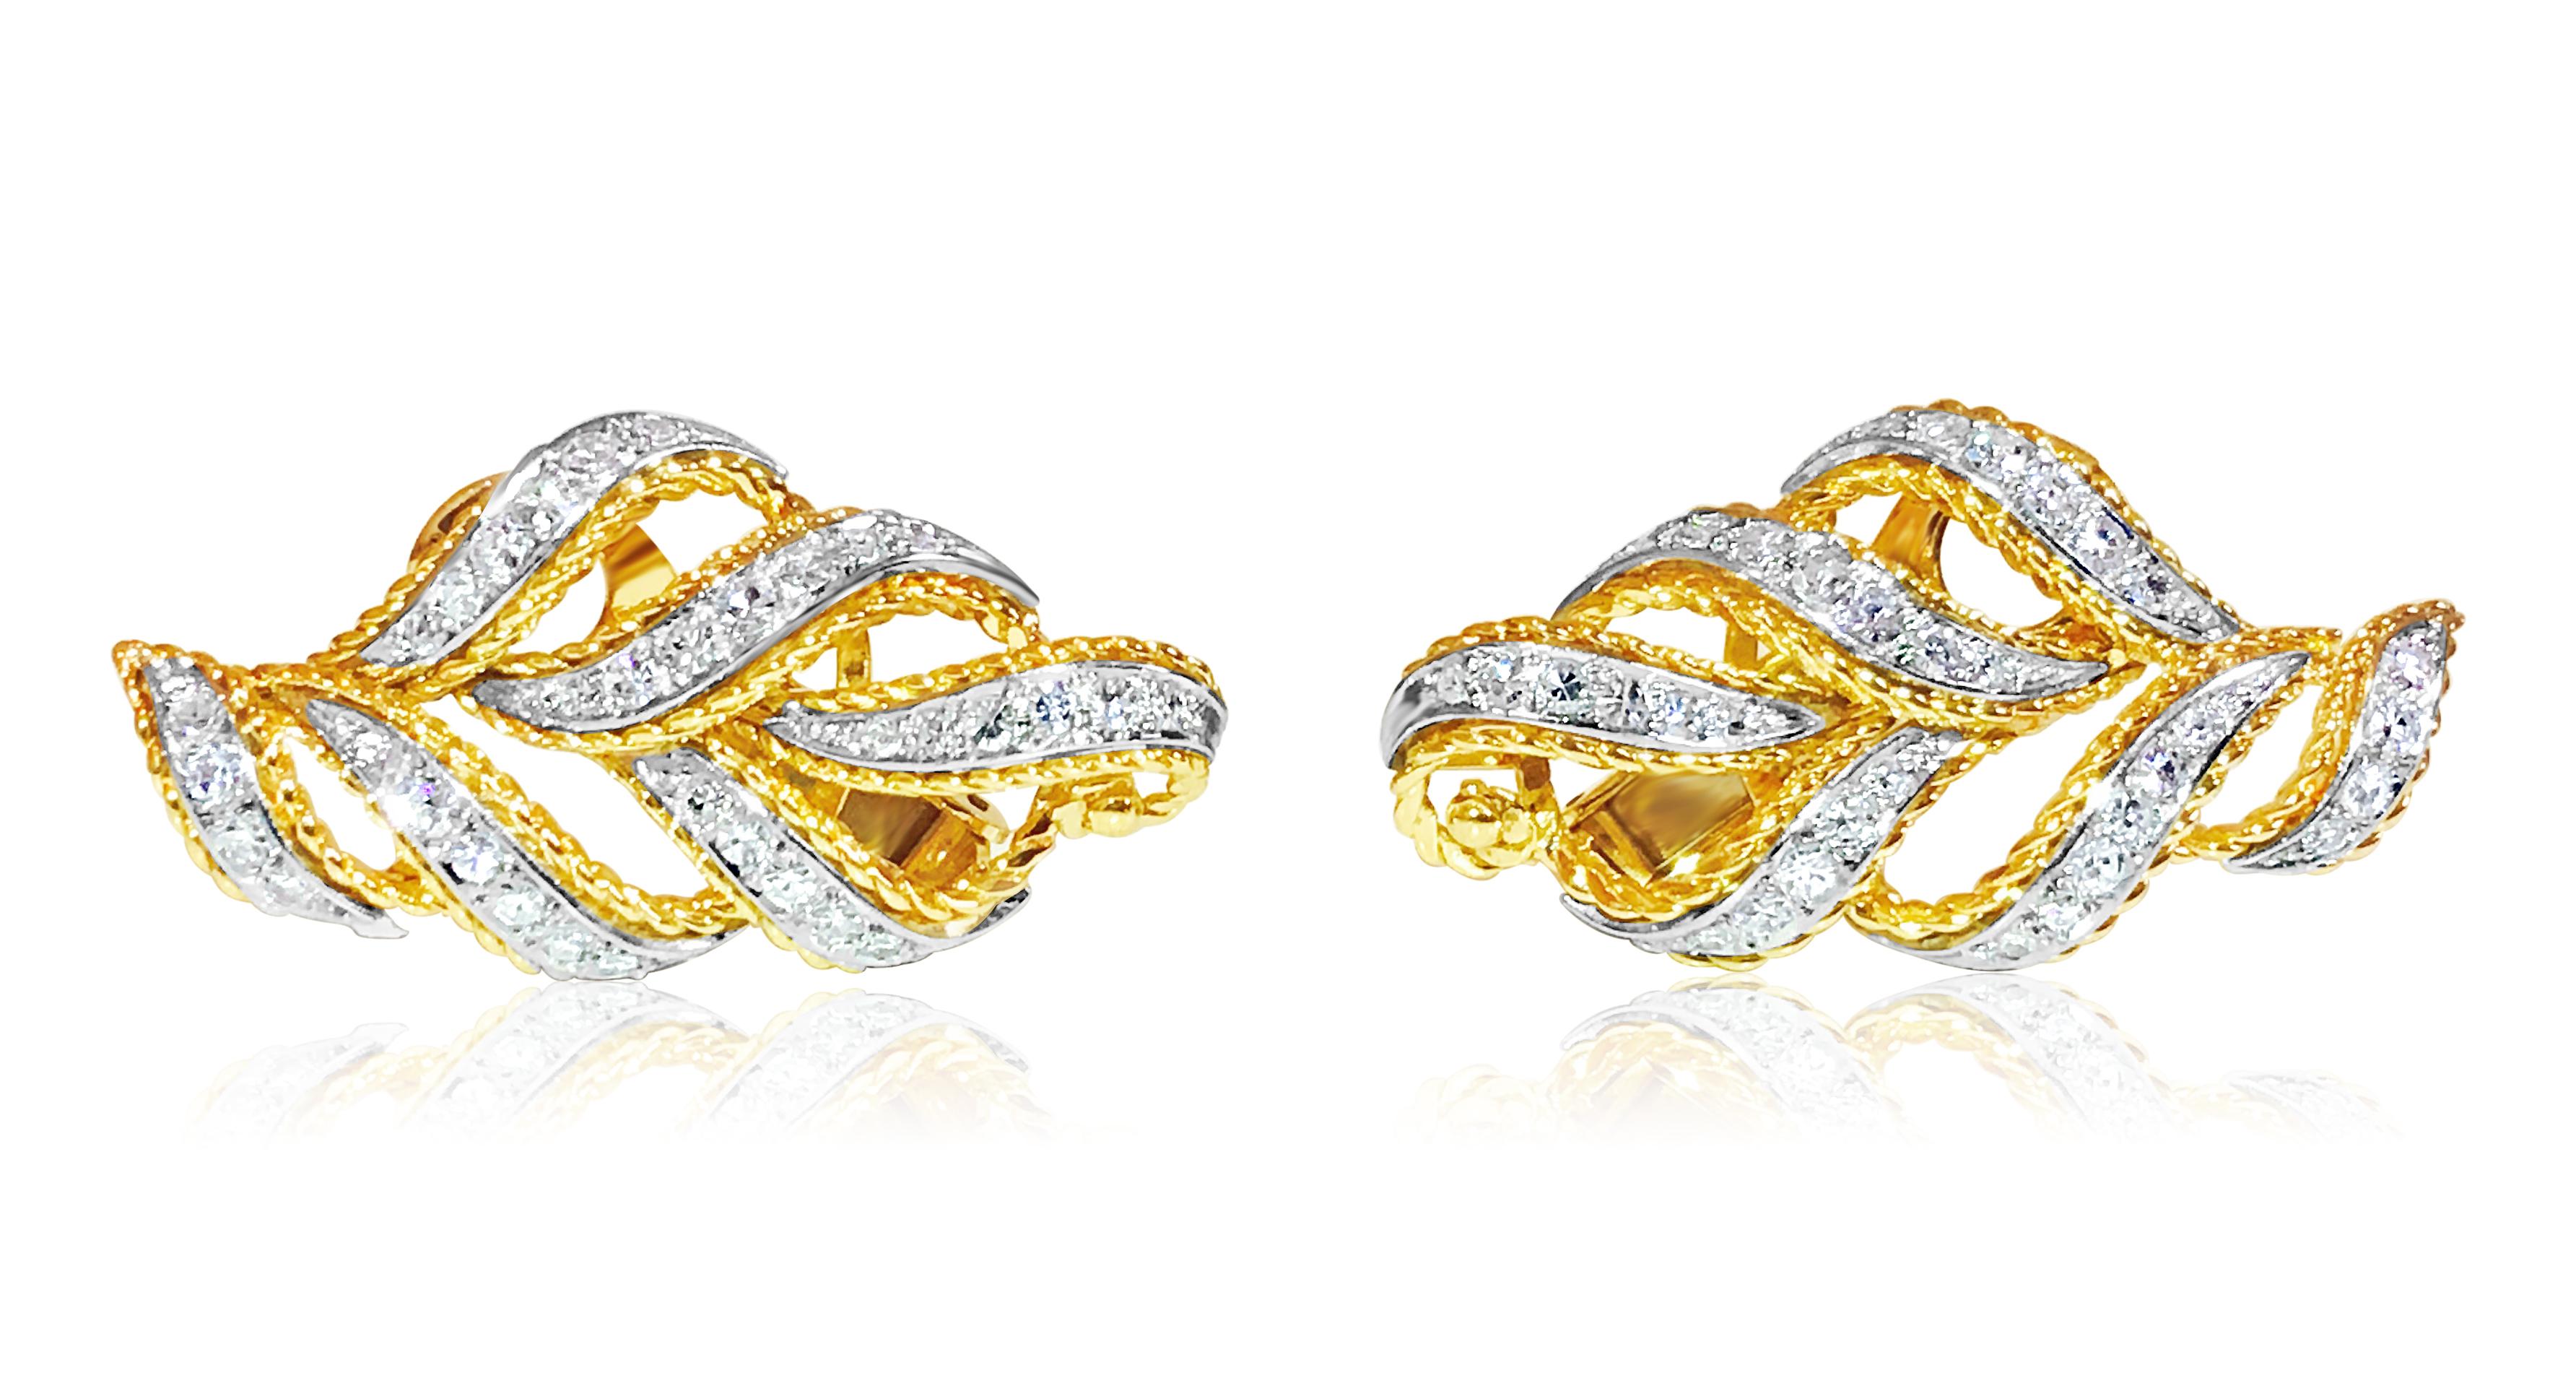 Fashioned from 14K yellow gold, these clip-on earrings feature a total carat weight of 2.00 carats of round-cut diamonds, boasting VS clarity and G color. Their elegant leaf-like design exudes sophistication, while the diamonds' superb luster and